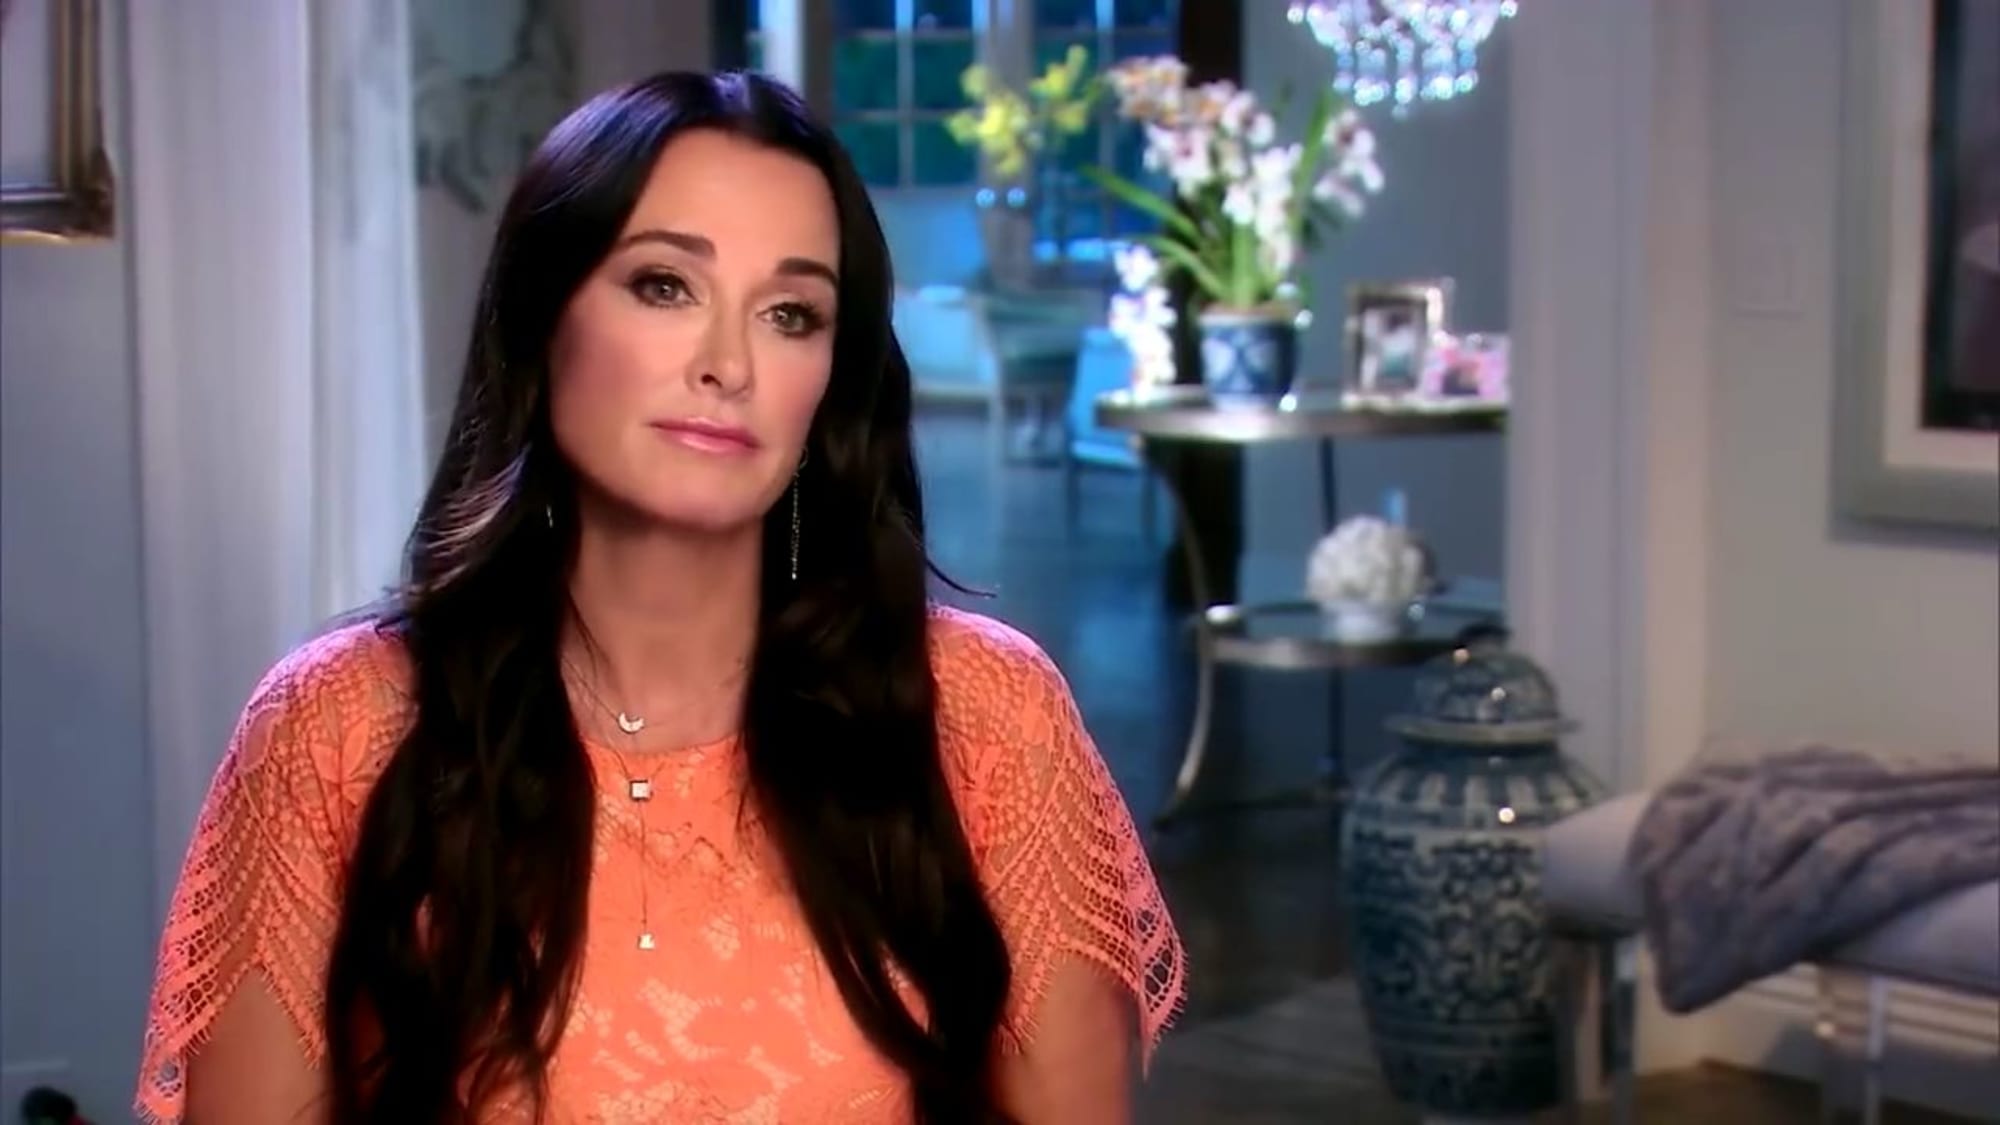 Kyle Richards Is Getting An Abc Series Based On Her Own Life 